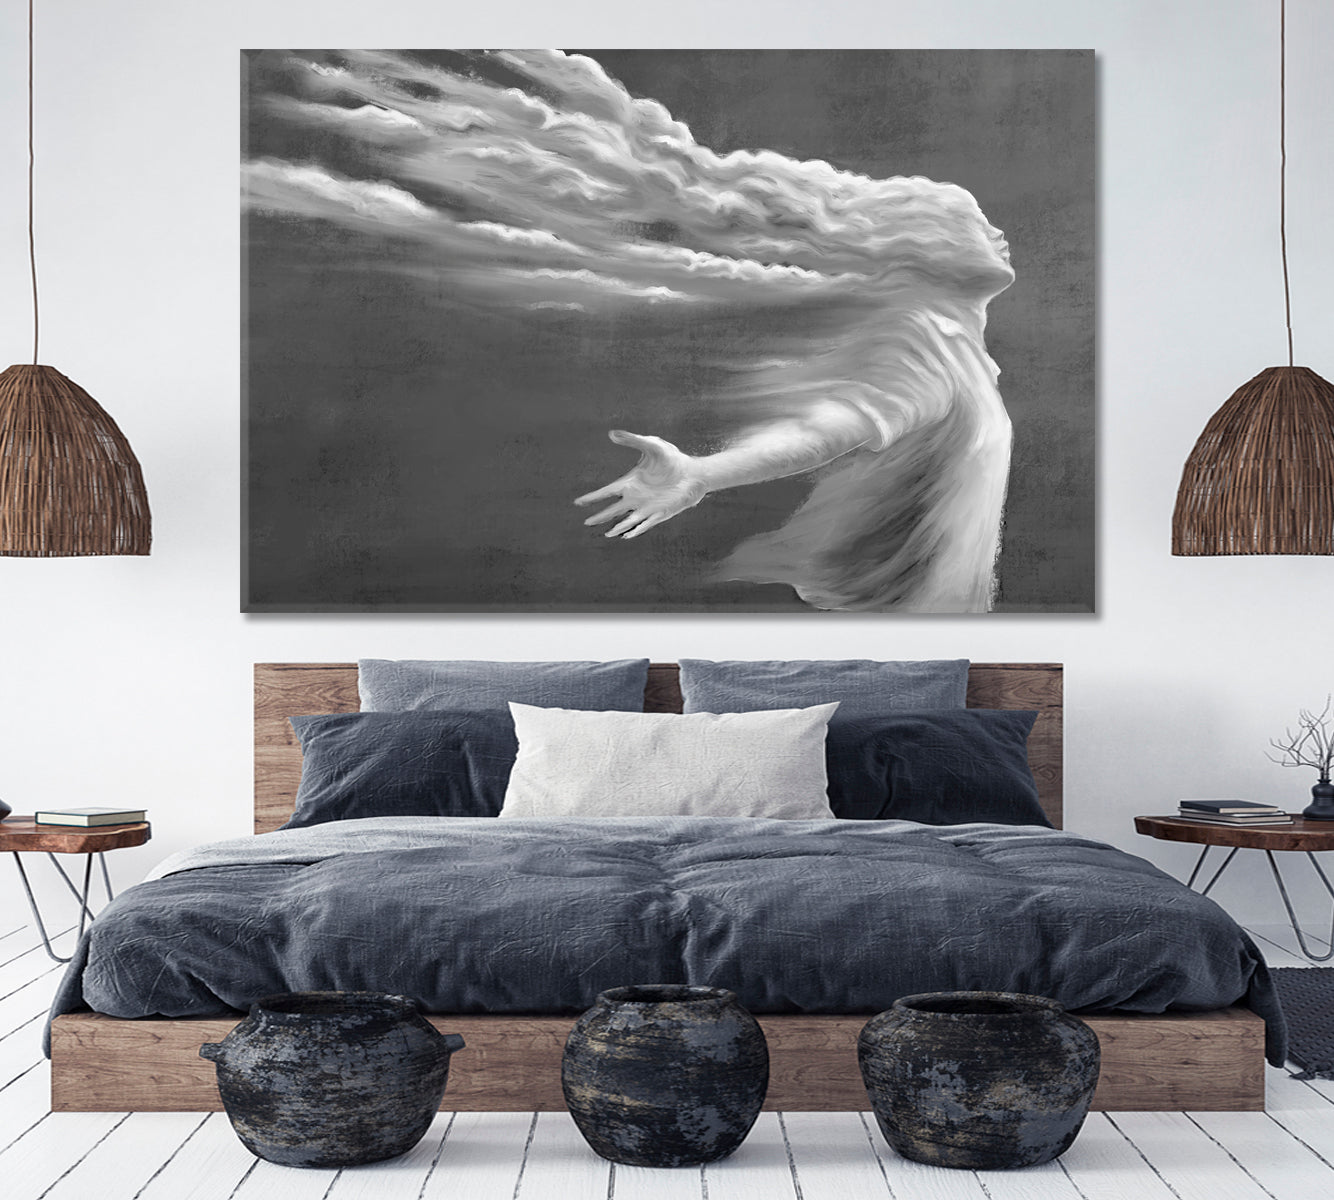 TOWARD THE WIND Spiritual Freedom Dream Happiness Concept Surreal Art Surreal Fantasy Large Art Print Décor Artesty 1 panel 24" x 16" 